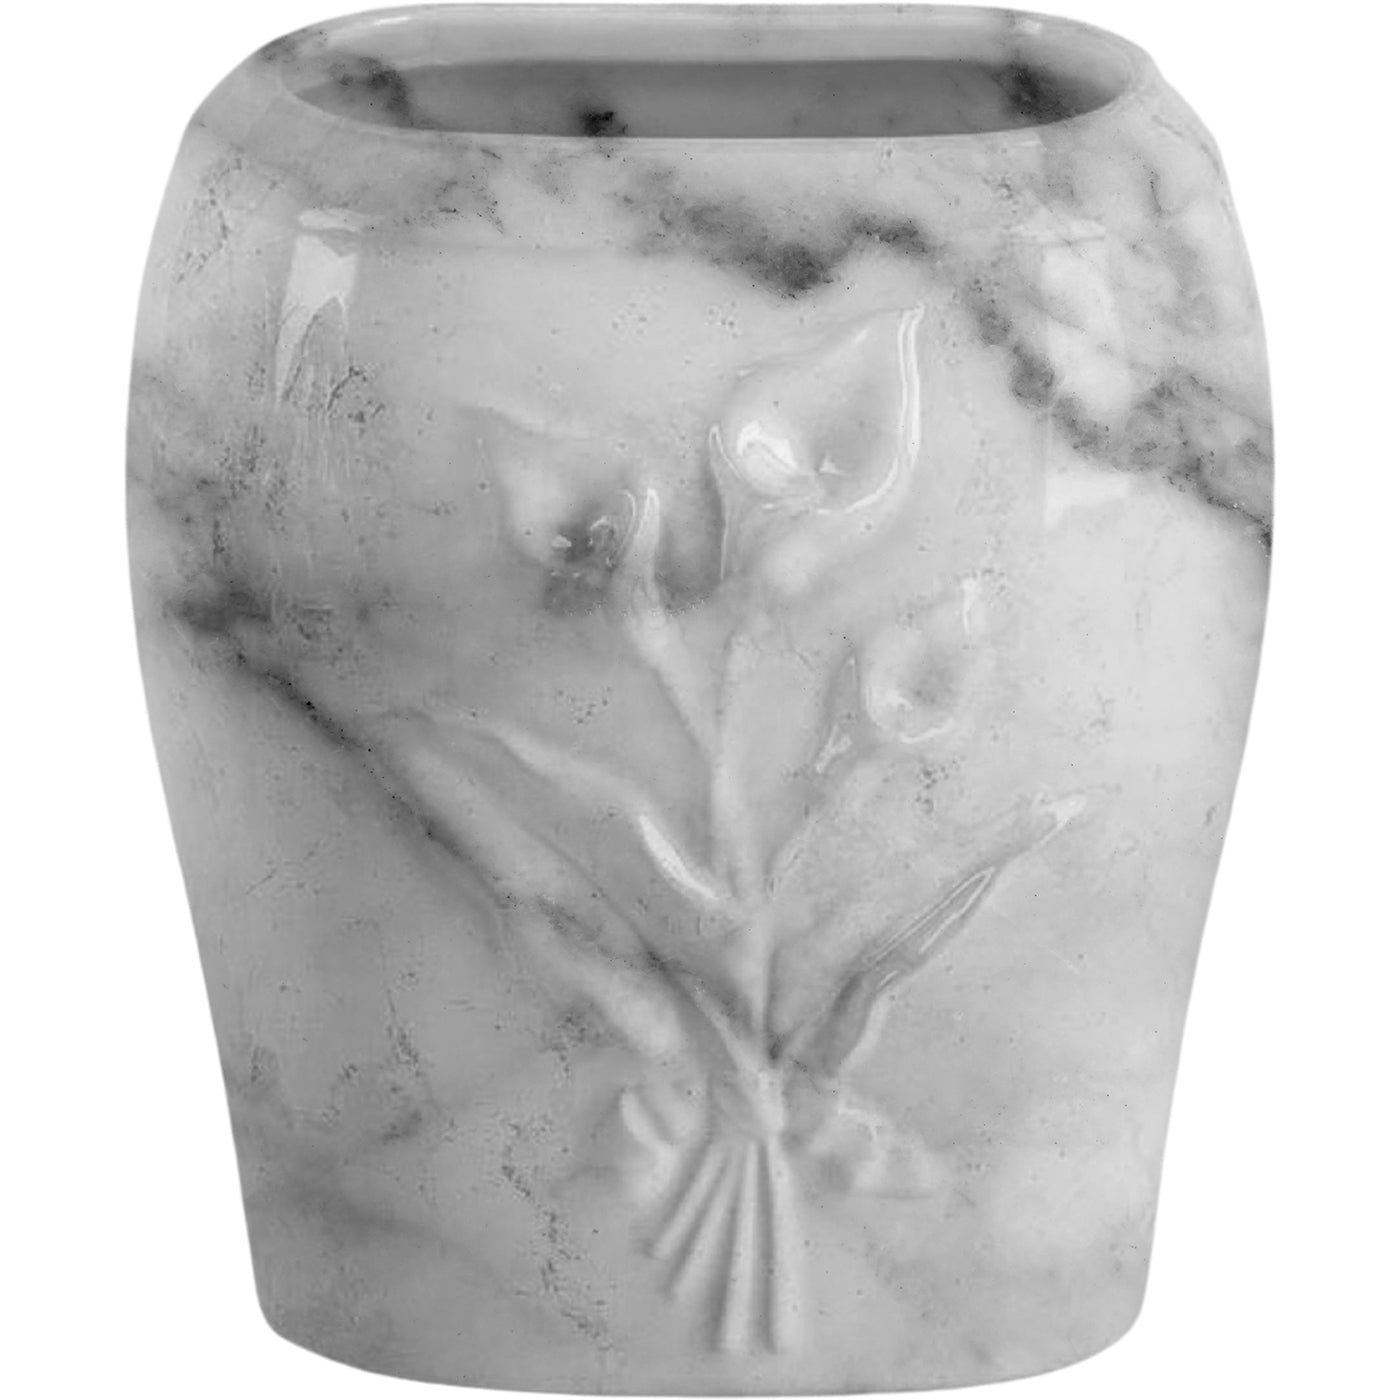 Rectangular grave vase Calla carrara 19x17cm - 7.5x6.7in In white porcelain with carrara decoration, wall attached CAL160P/CARR